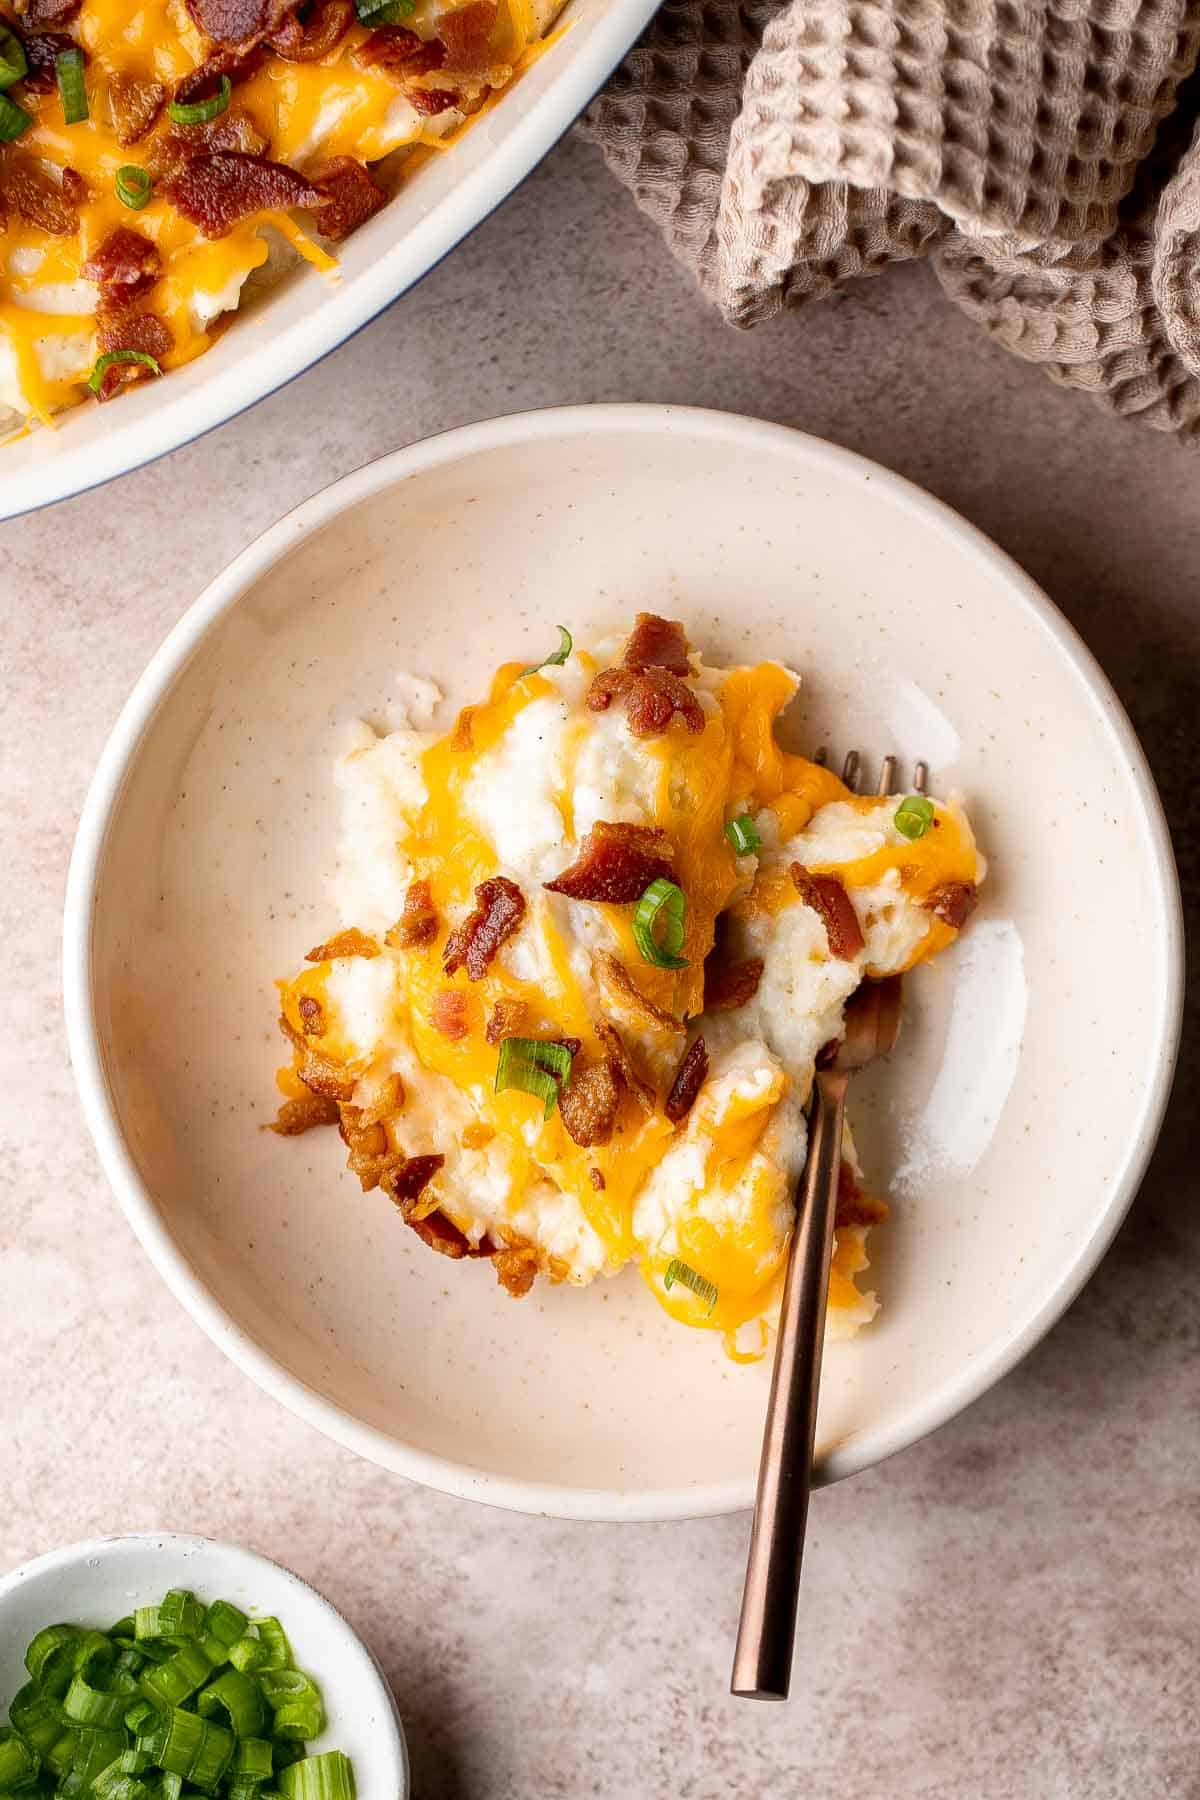 This Mashed Potato Casserole elevates an ordinary batch of creamy mashed potatoes into something divine topped with cheddar, bacon bits, and green onions. | aheadofthyme.com